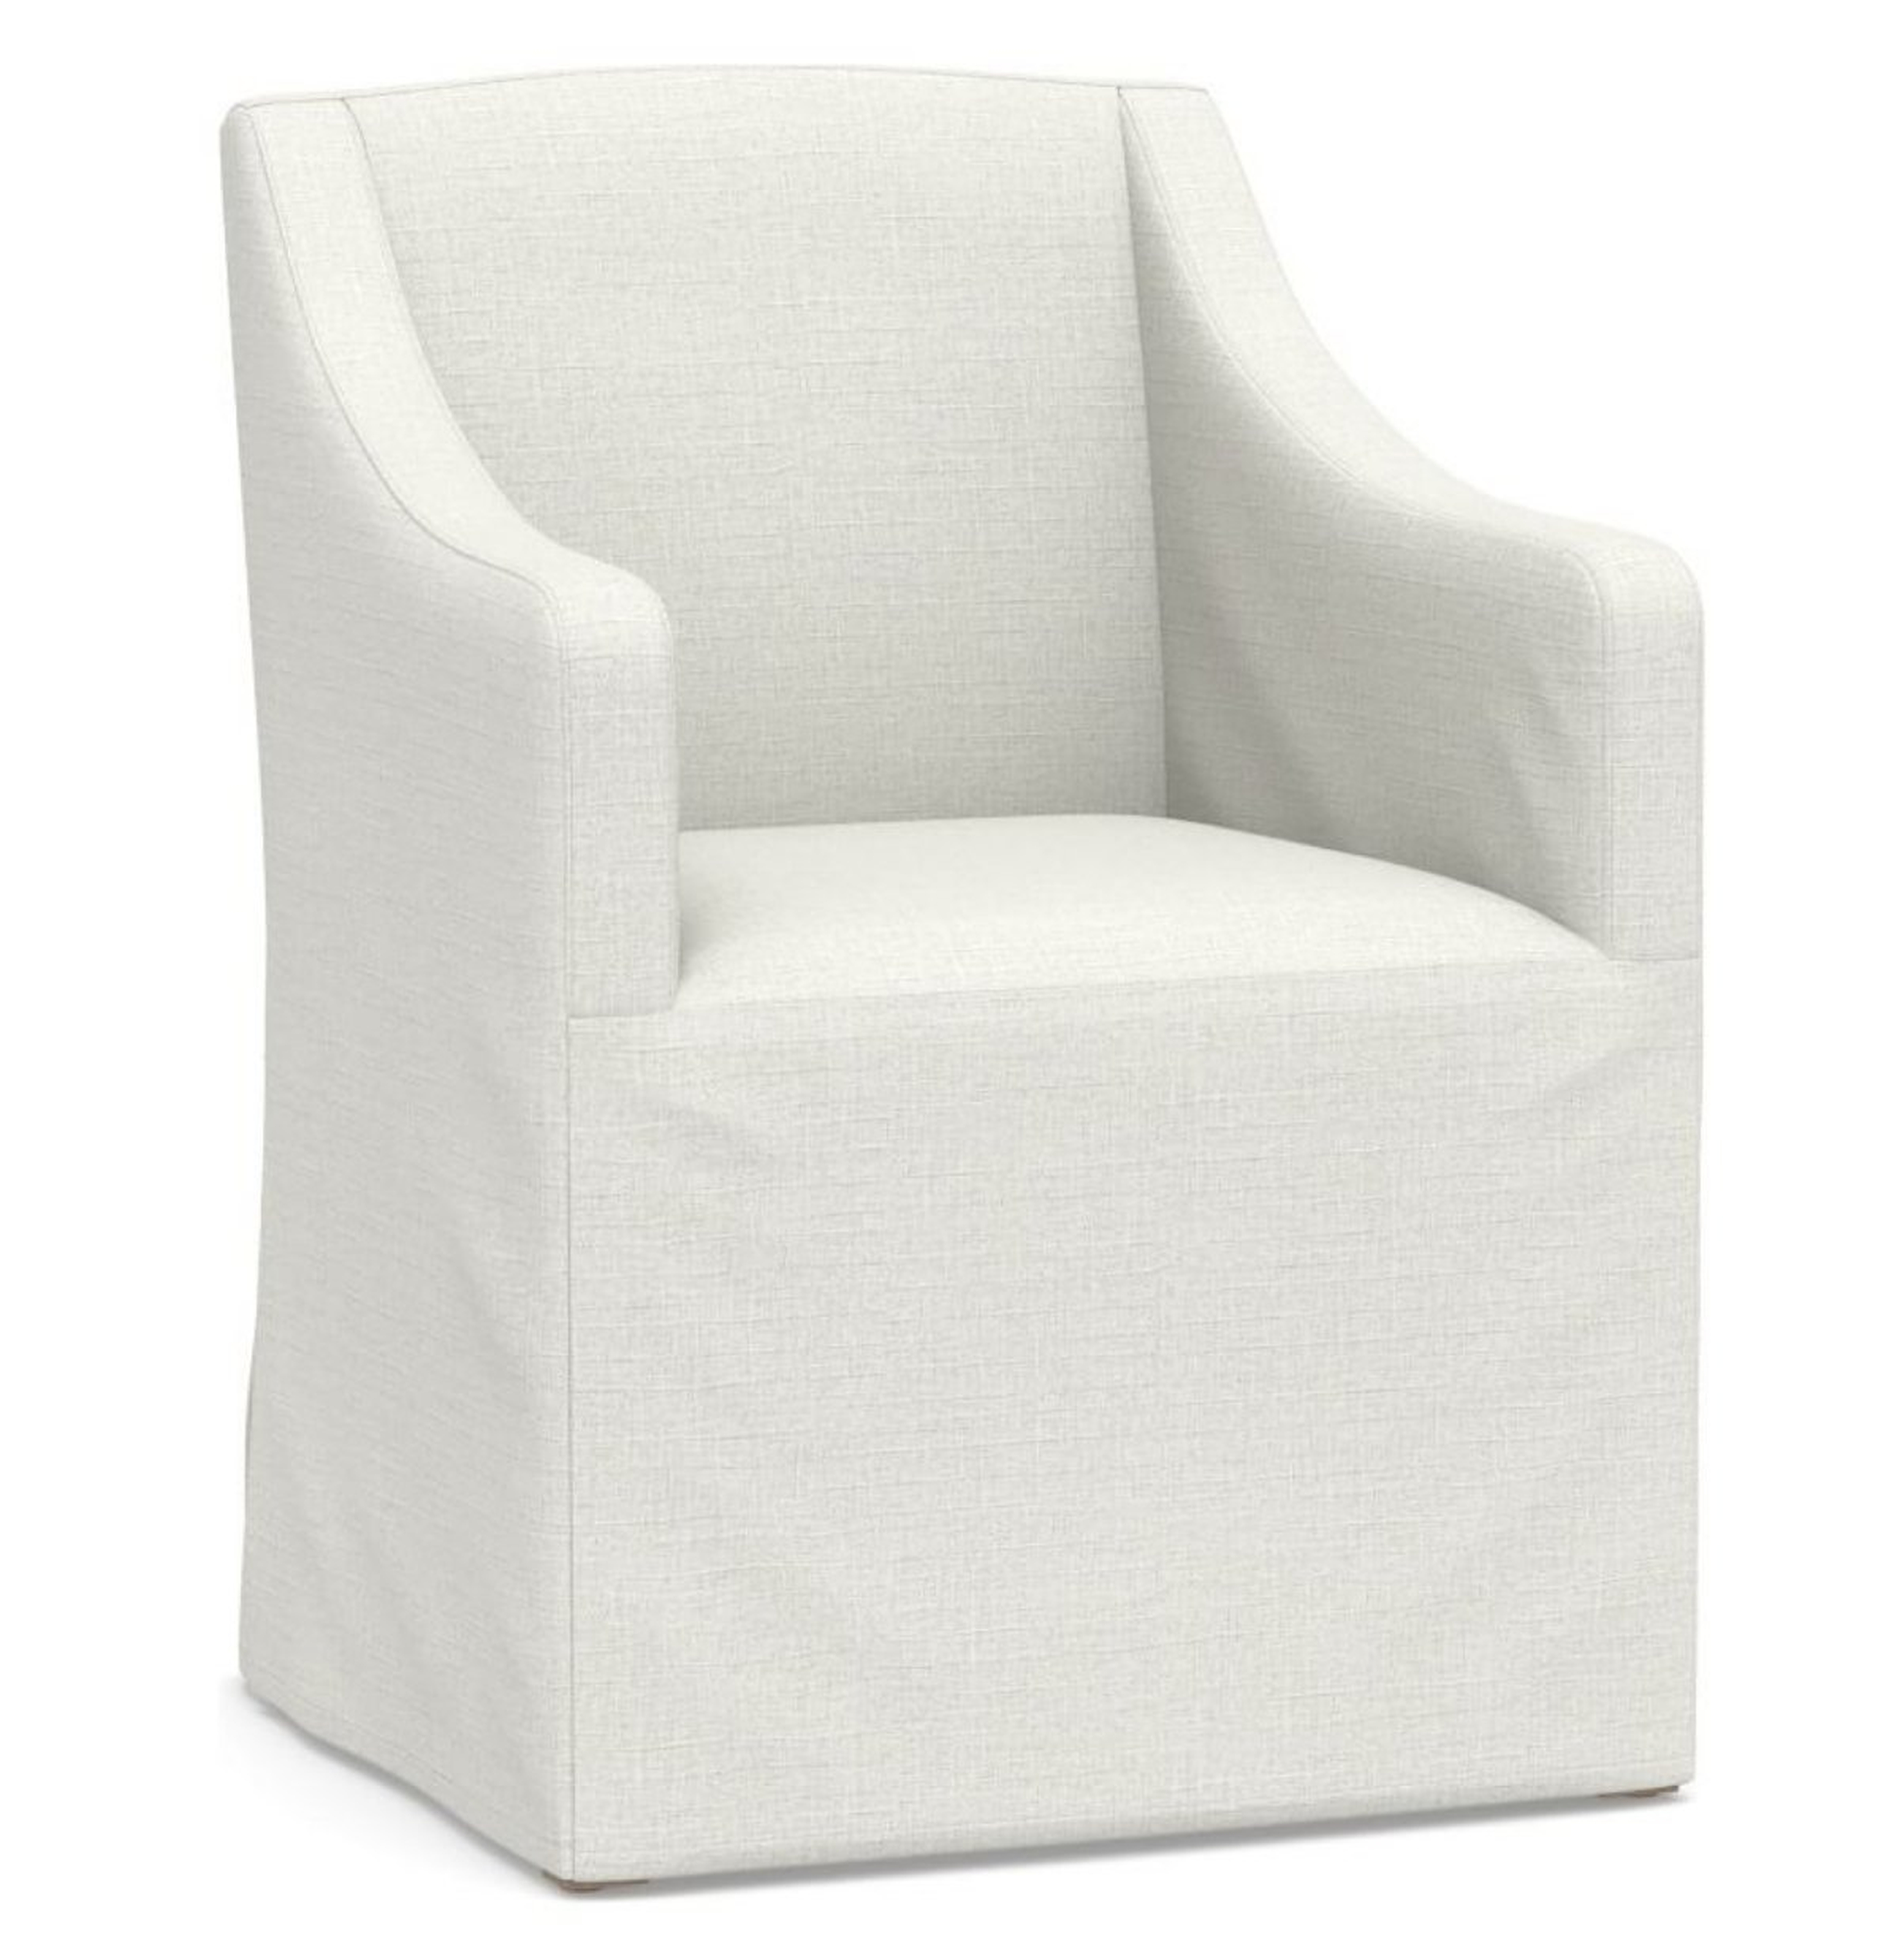 Classic Slipcovered Slope Armchair with Gray Wash Frame, Basketweave Slub Ivory - Pottery Barn